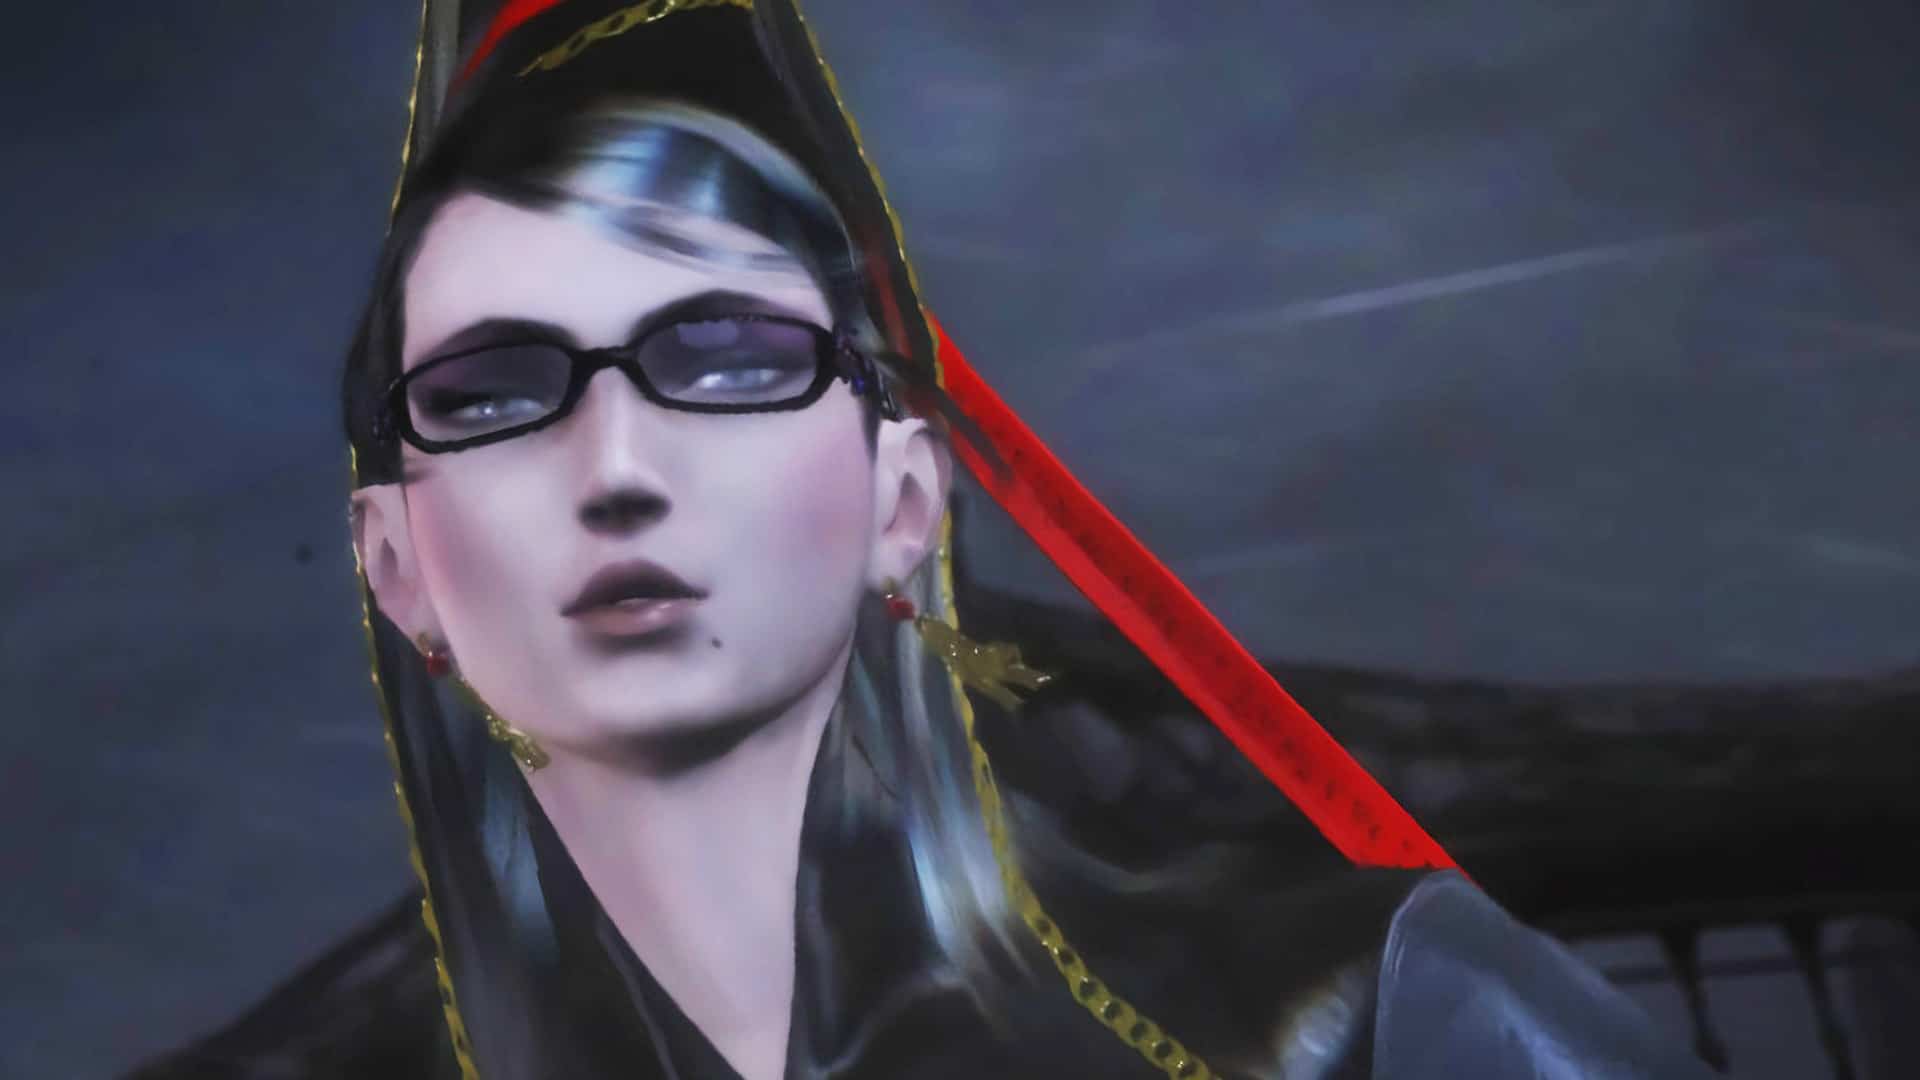 bayonetta looking into the distance